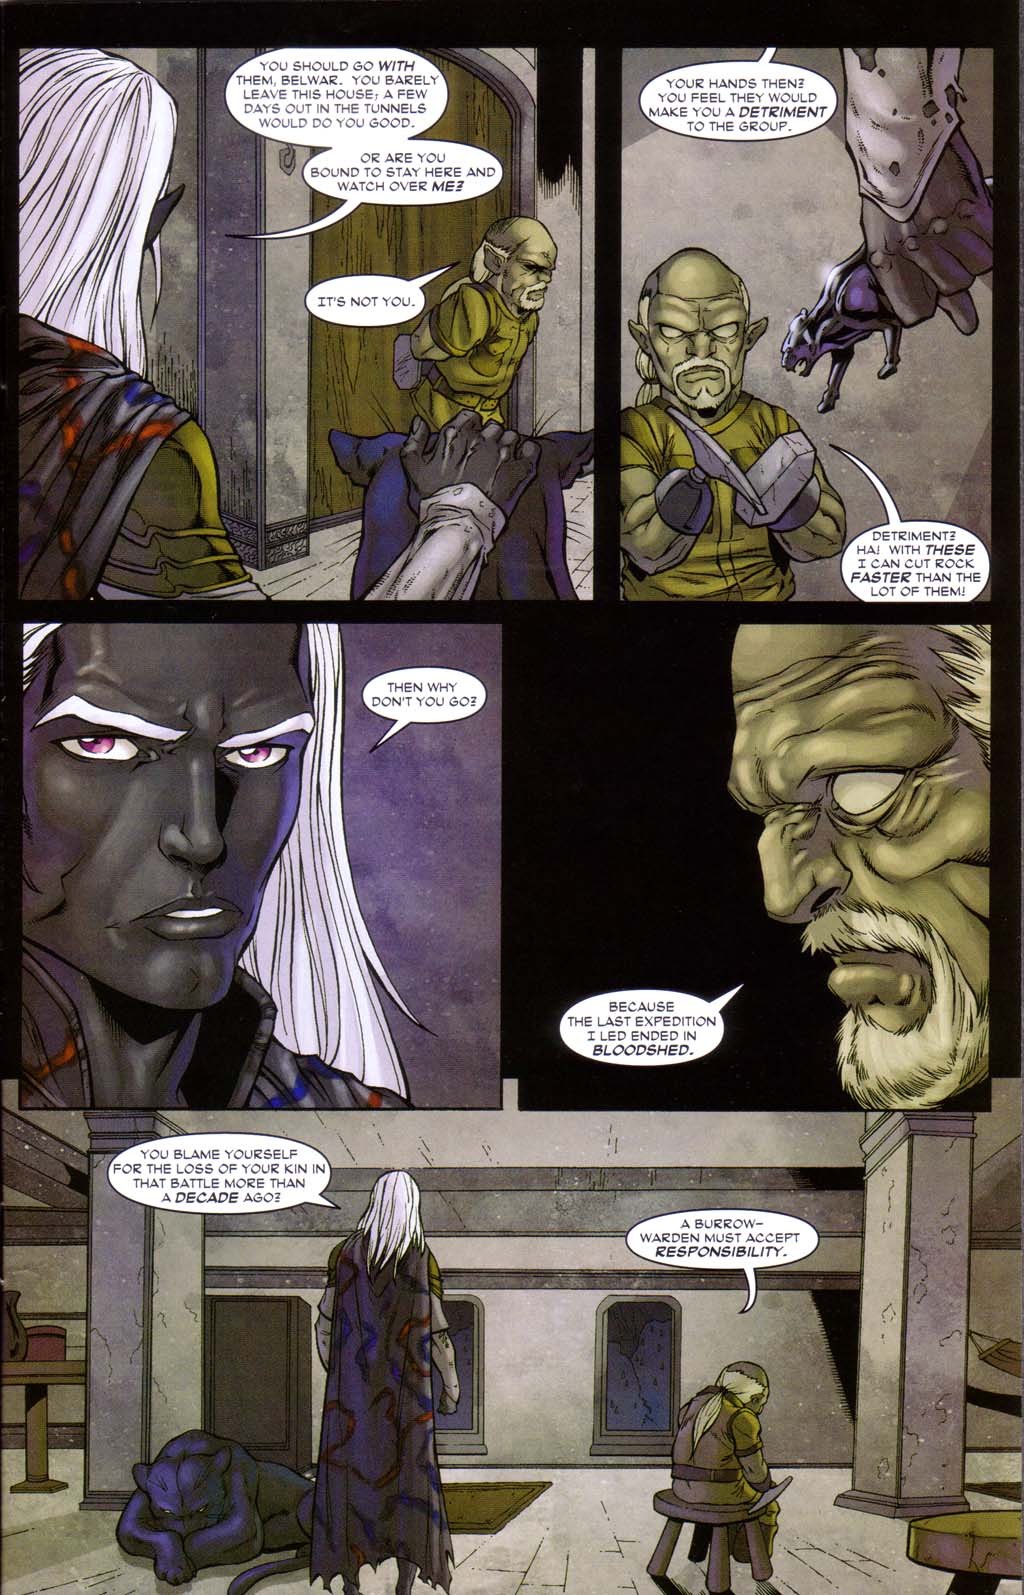 Forgotten Realms: Exile #2 - Issue #2, Part 1